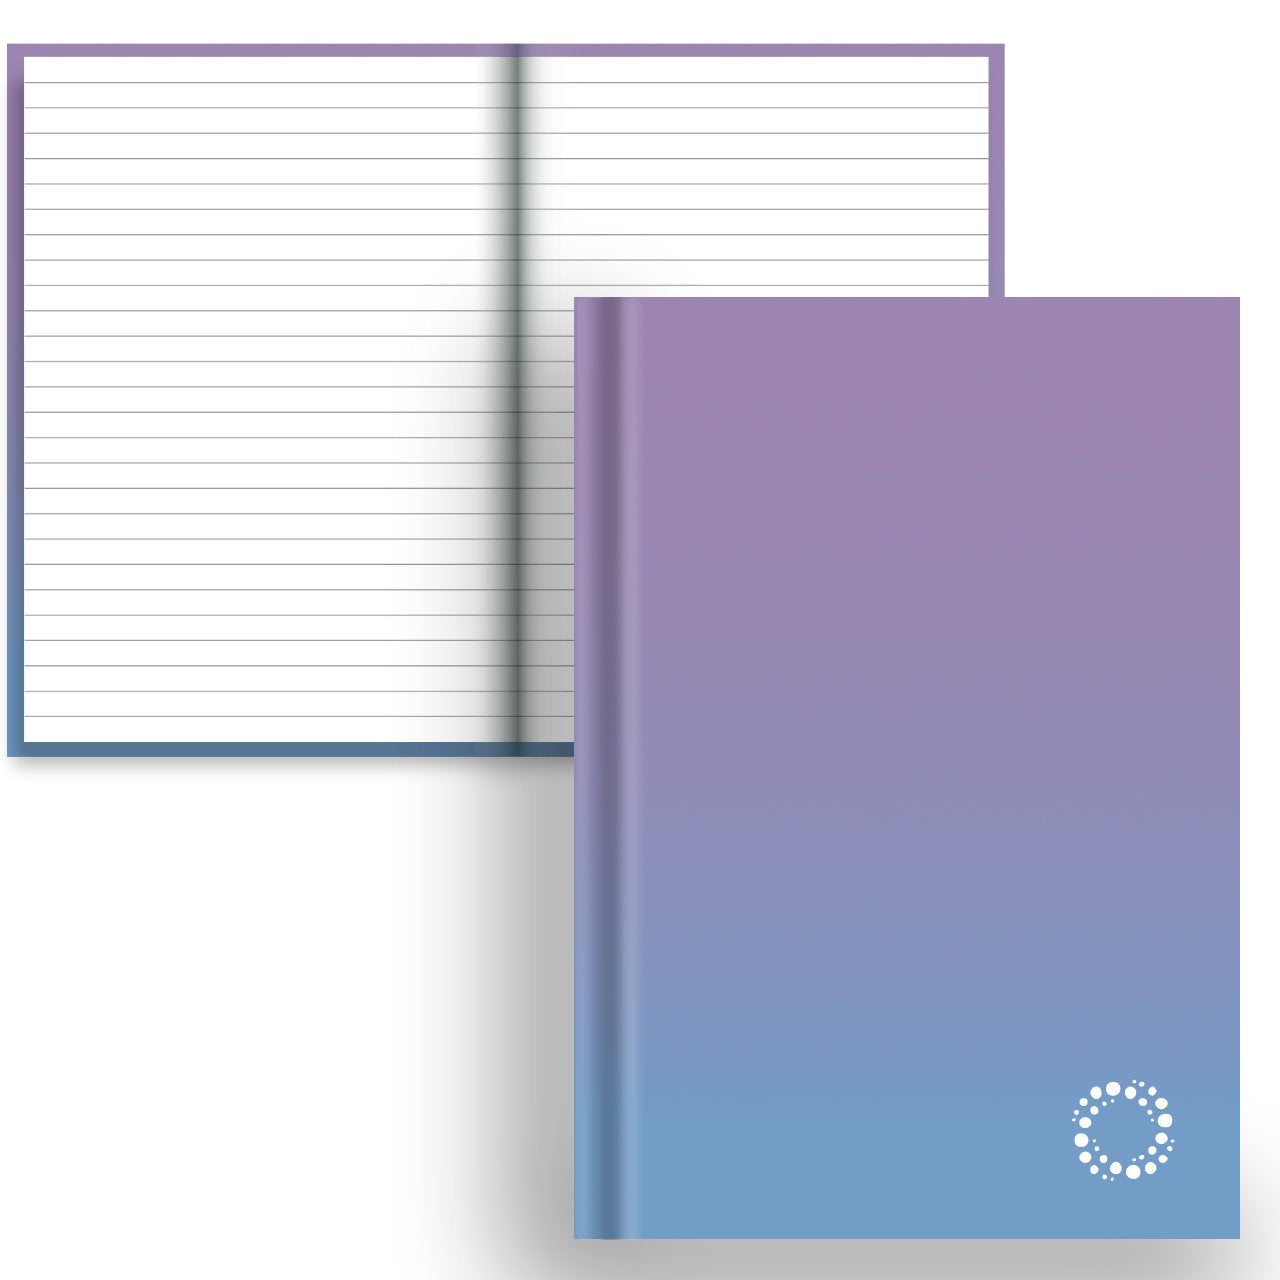 Periwinkle and Sky - Colour Fade A5 Hardback Notebook